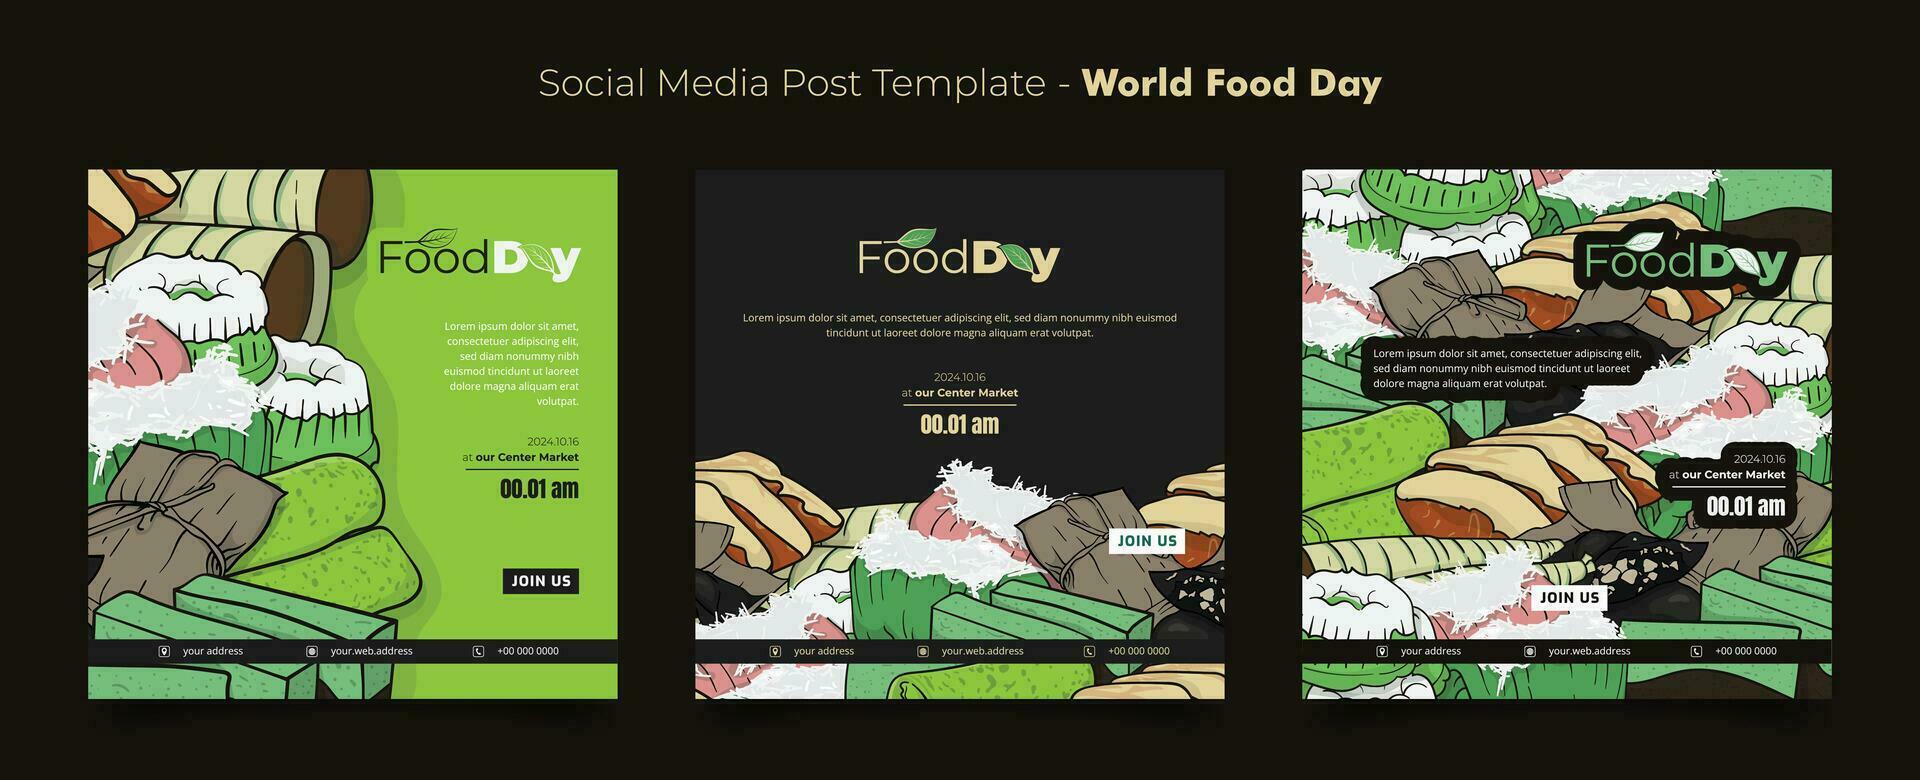 Social media post template with traditional cake in doodle art background for world food day design vector